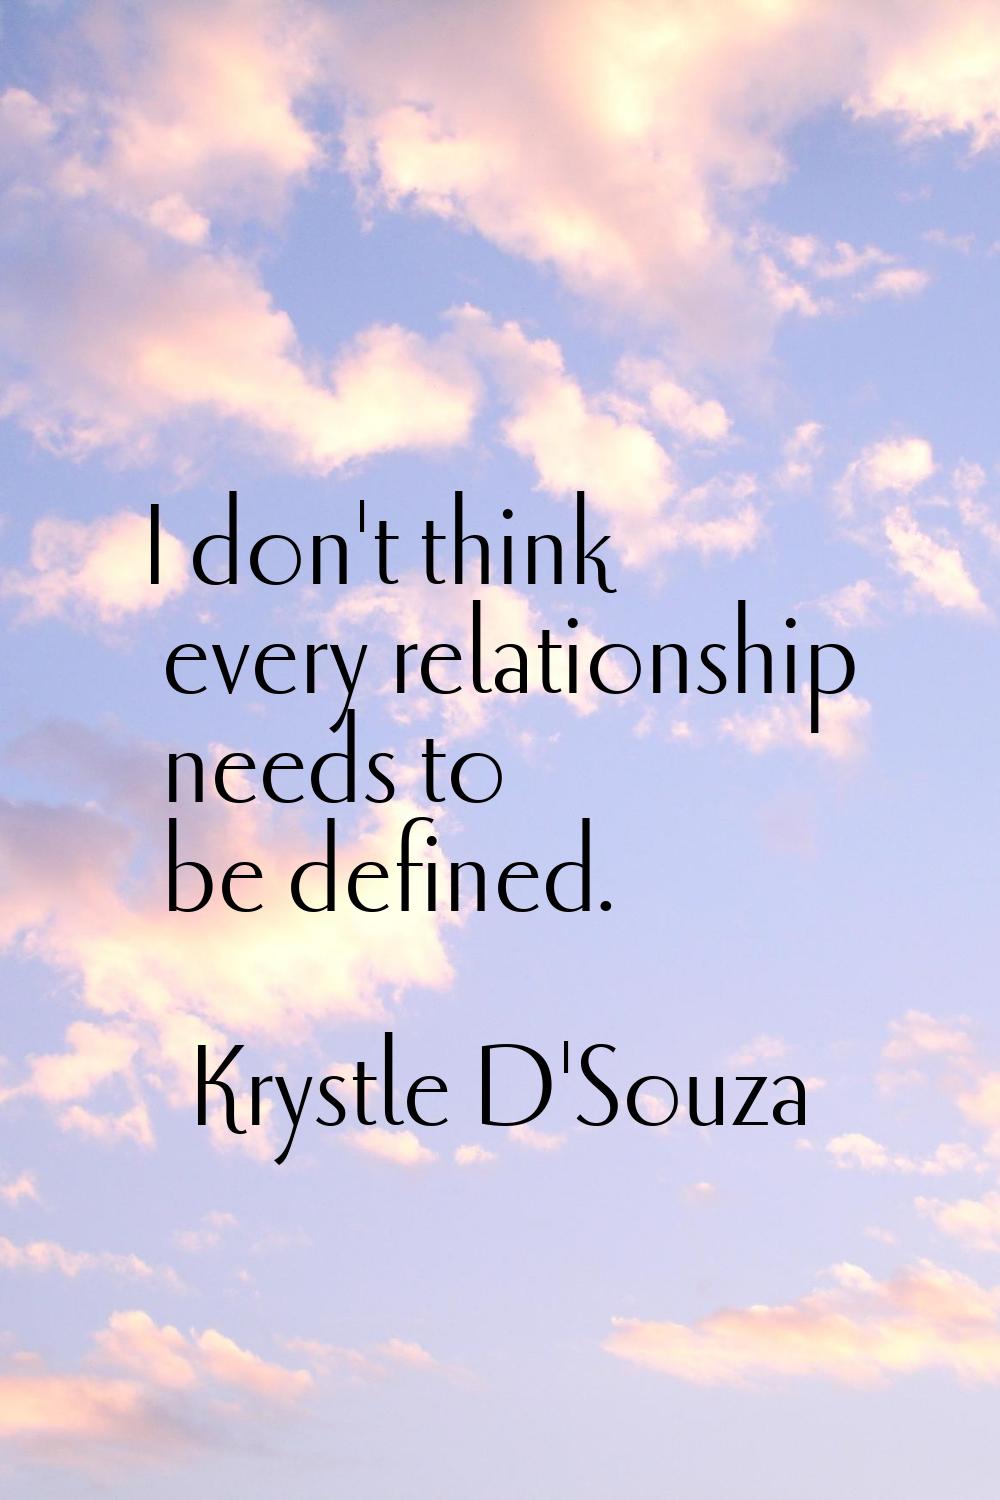 I don't think every relationship needs to be defined.